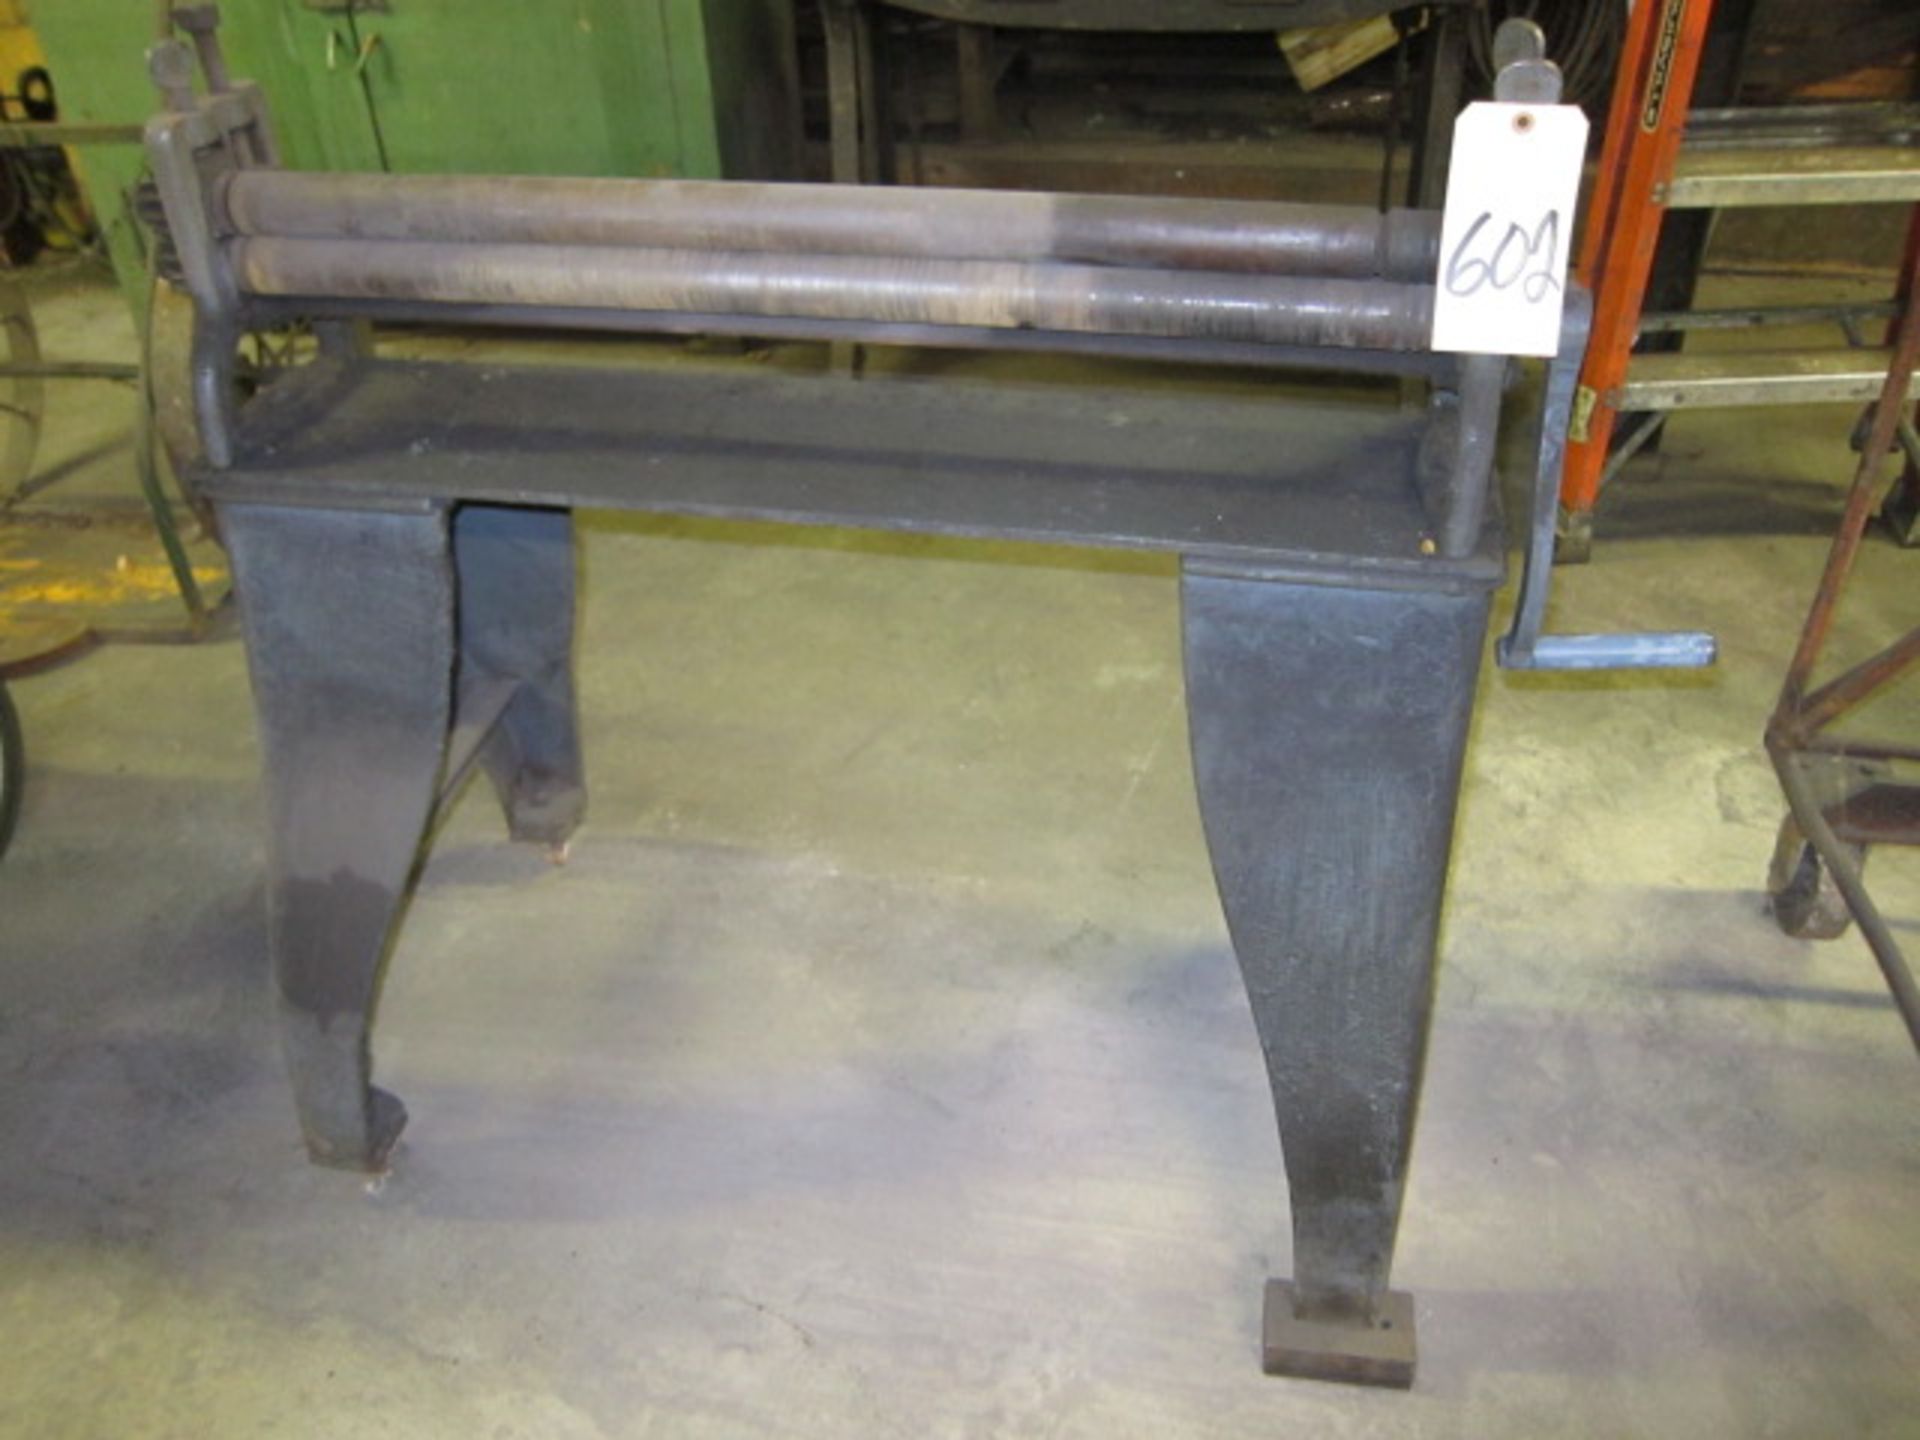 SLIP ROLL, PEXTO 36", wire grooves, fabricated stand